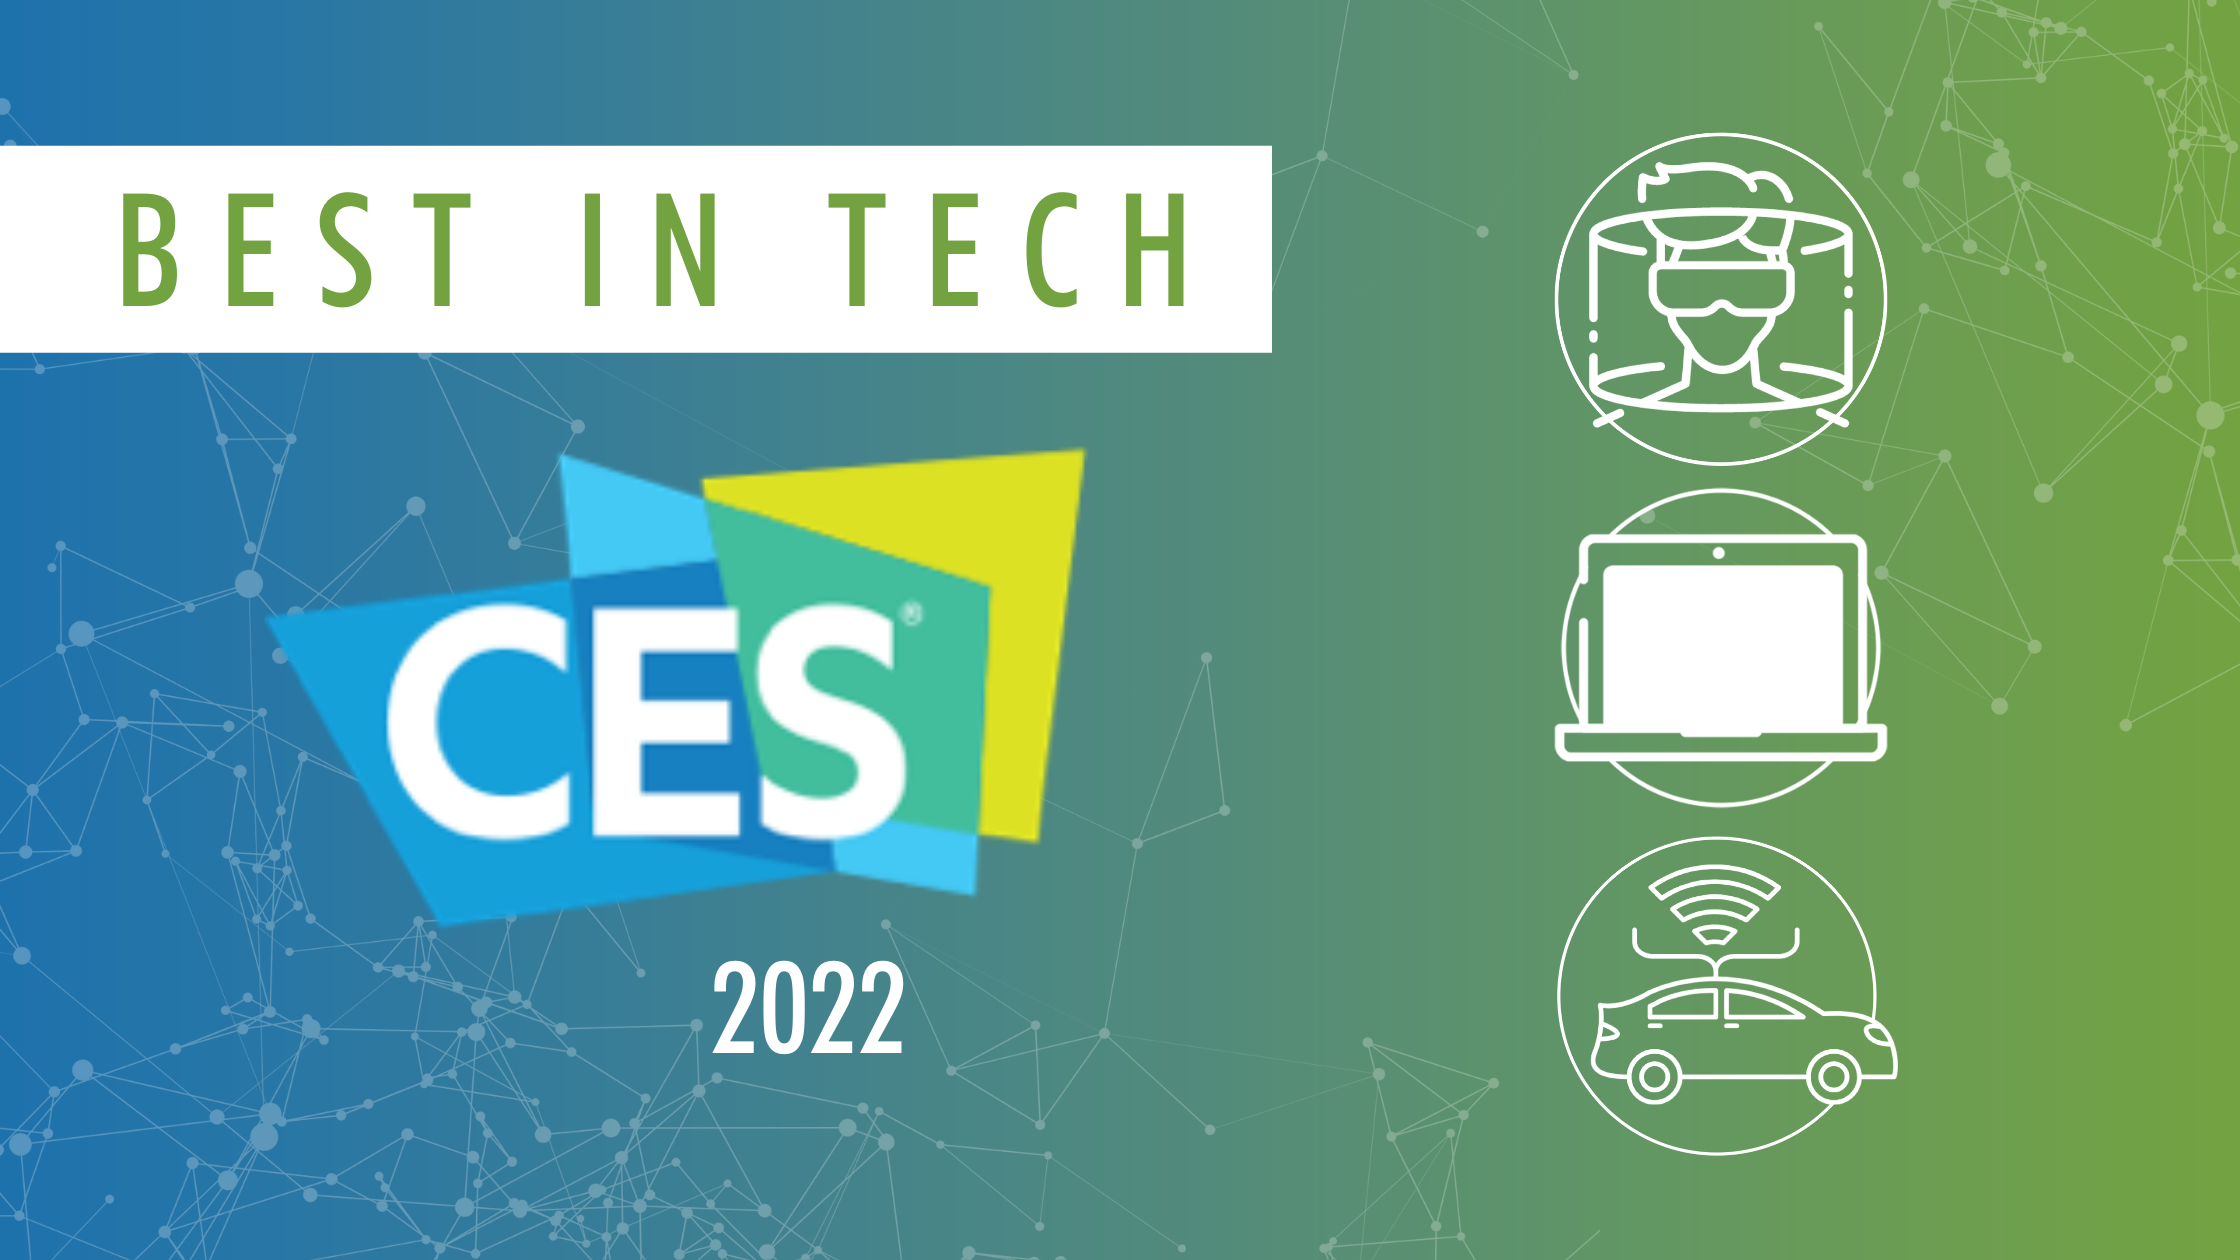 The Best of Tech: CES 2022 Highlights & Top Trends to Watch